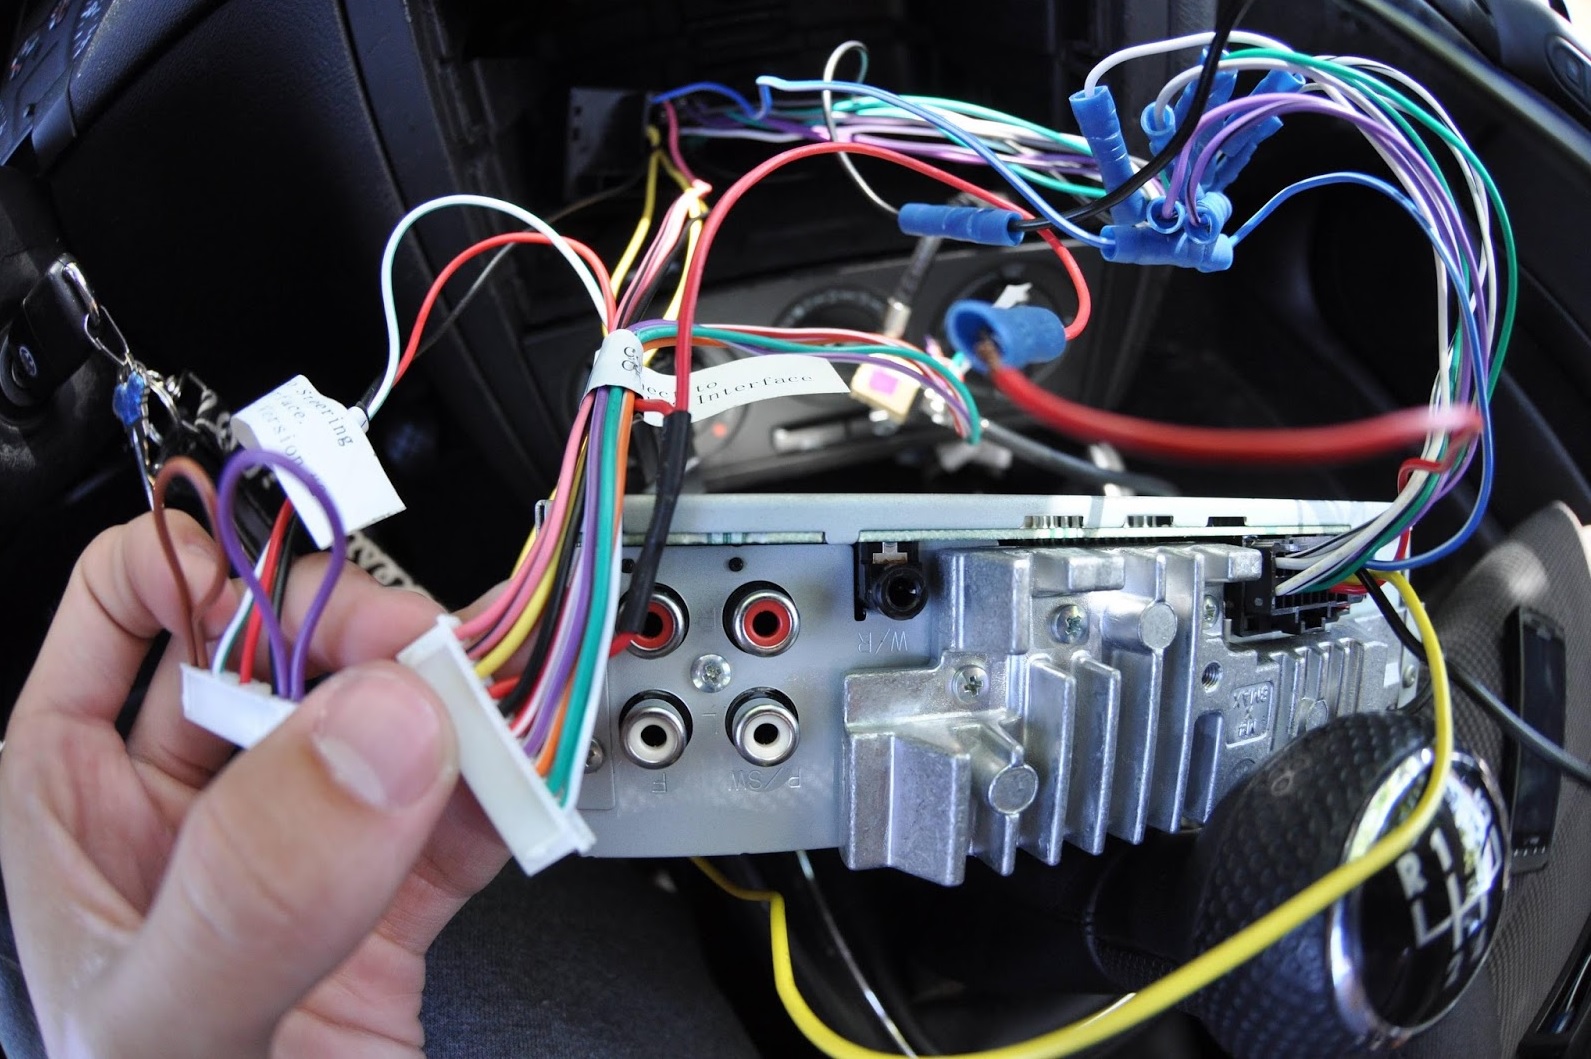 Fix A Pioneer Car Stereo That Keeps Shutting Off